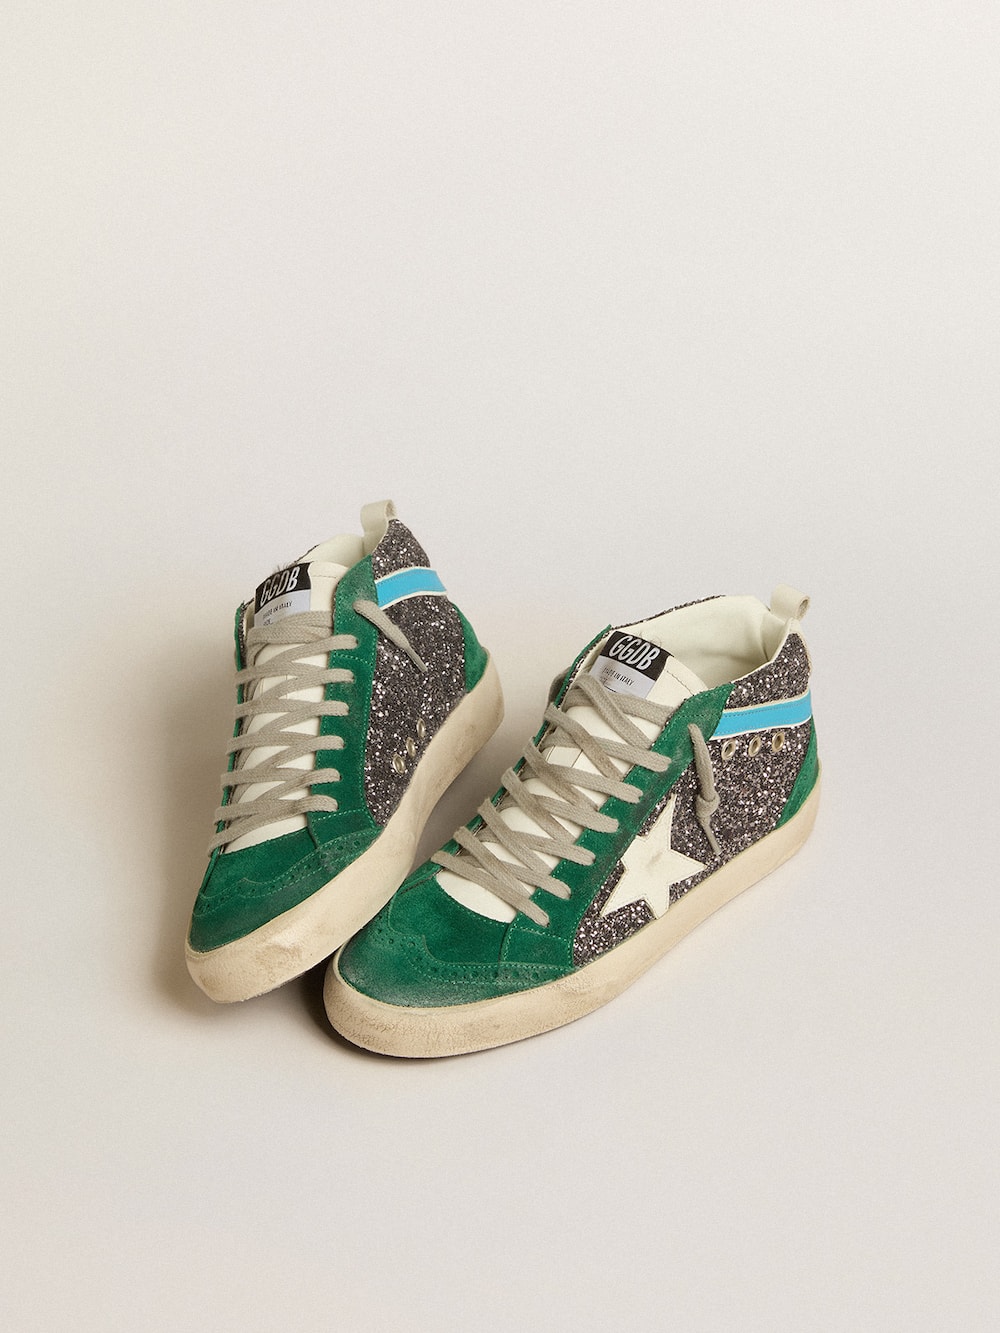 Golden Goose - Mid Star in anthracite glitter with leather star and light blue flash in 